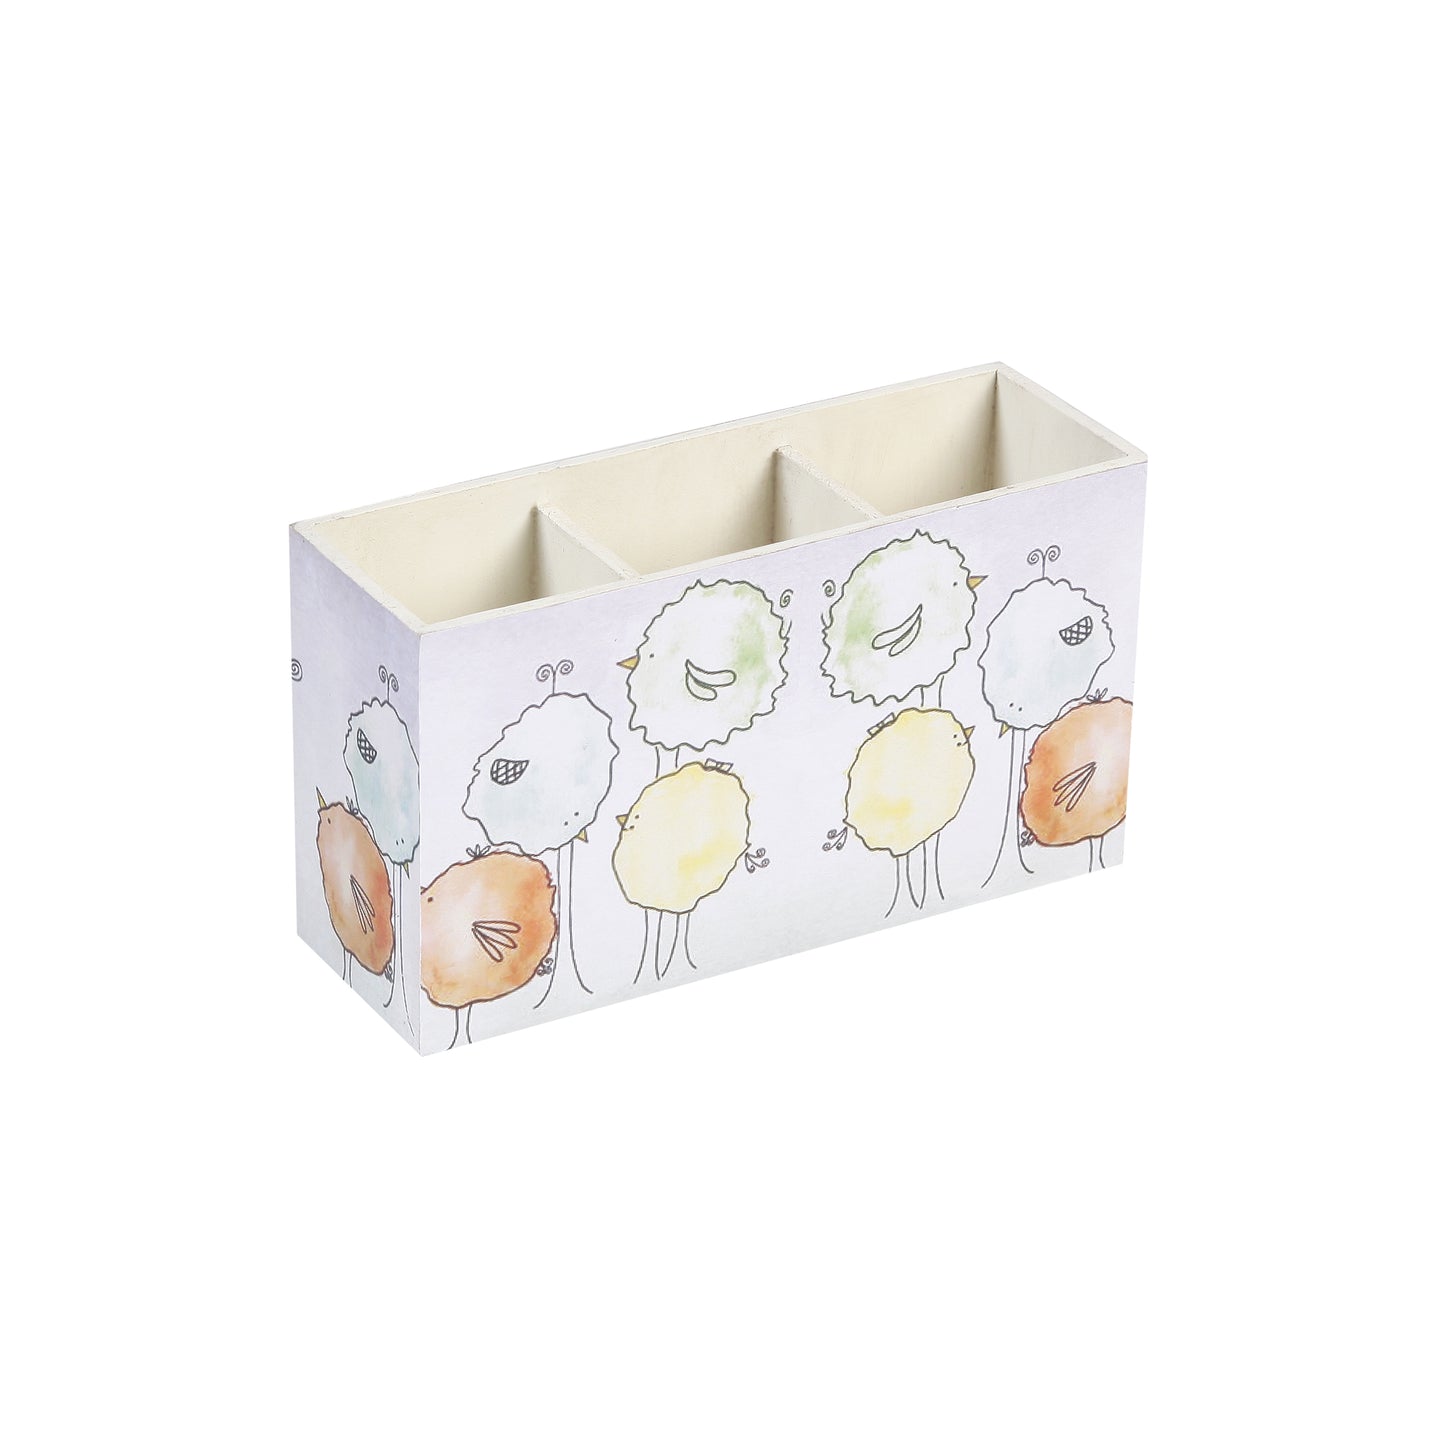 A Tiny Mistake Floral Caricature Trees Wooden Cutlery Holder, 18 x 10 x 6.5 cm